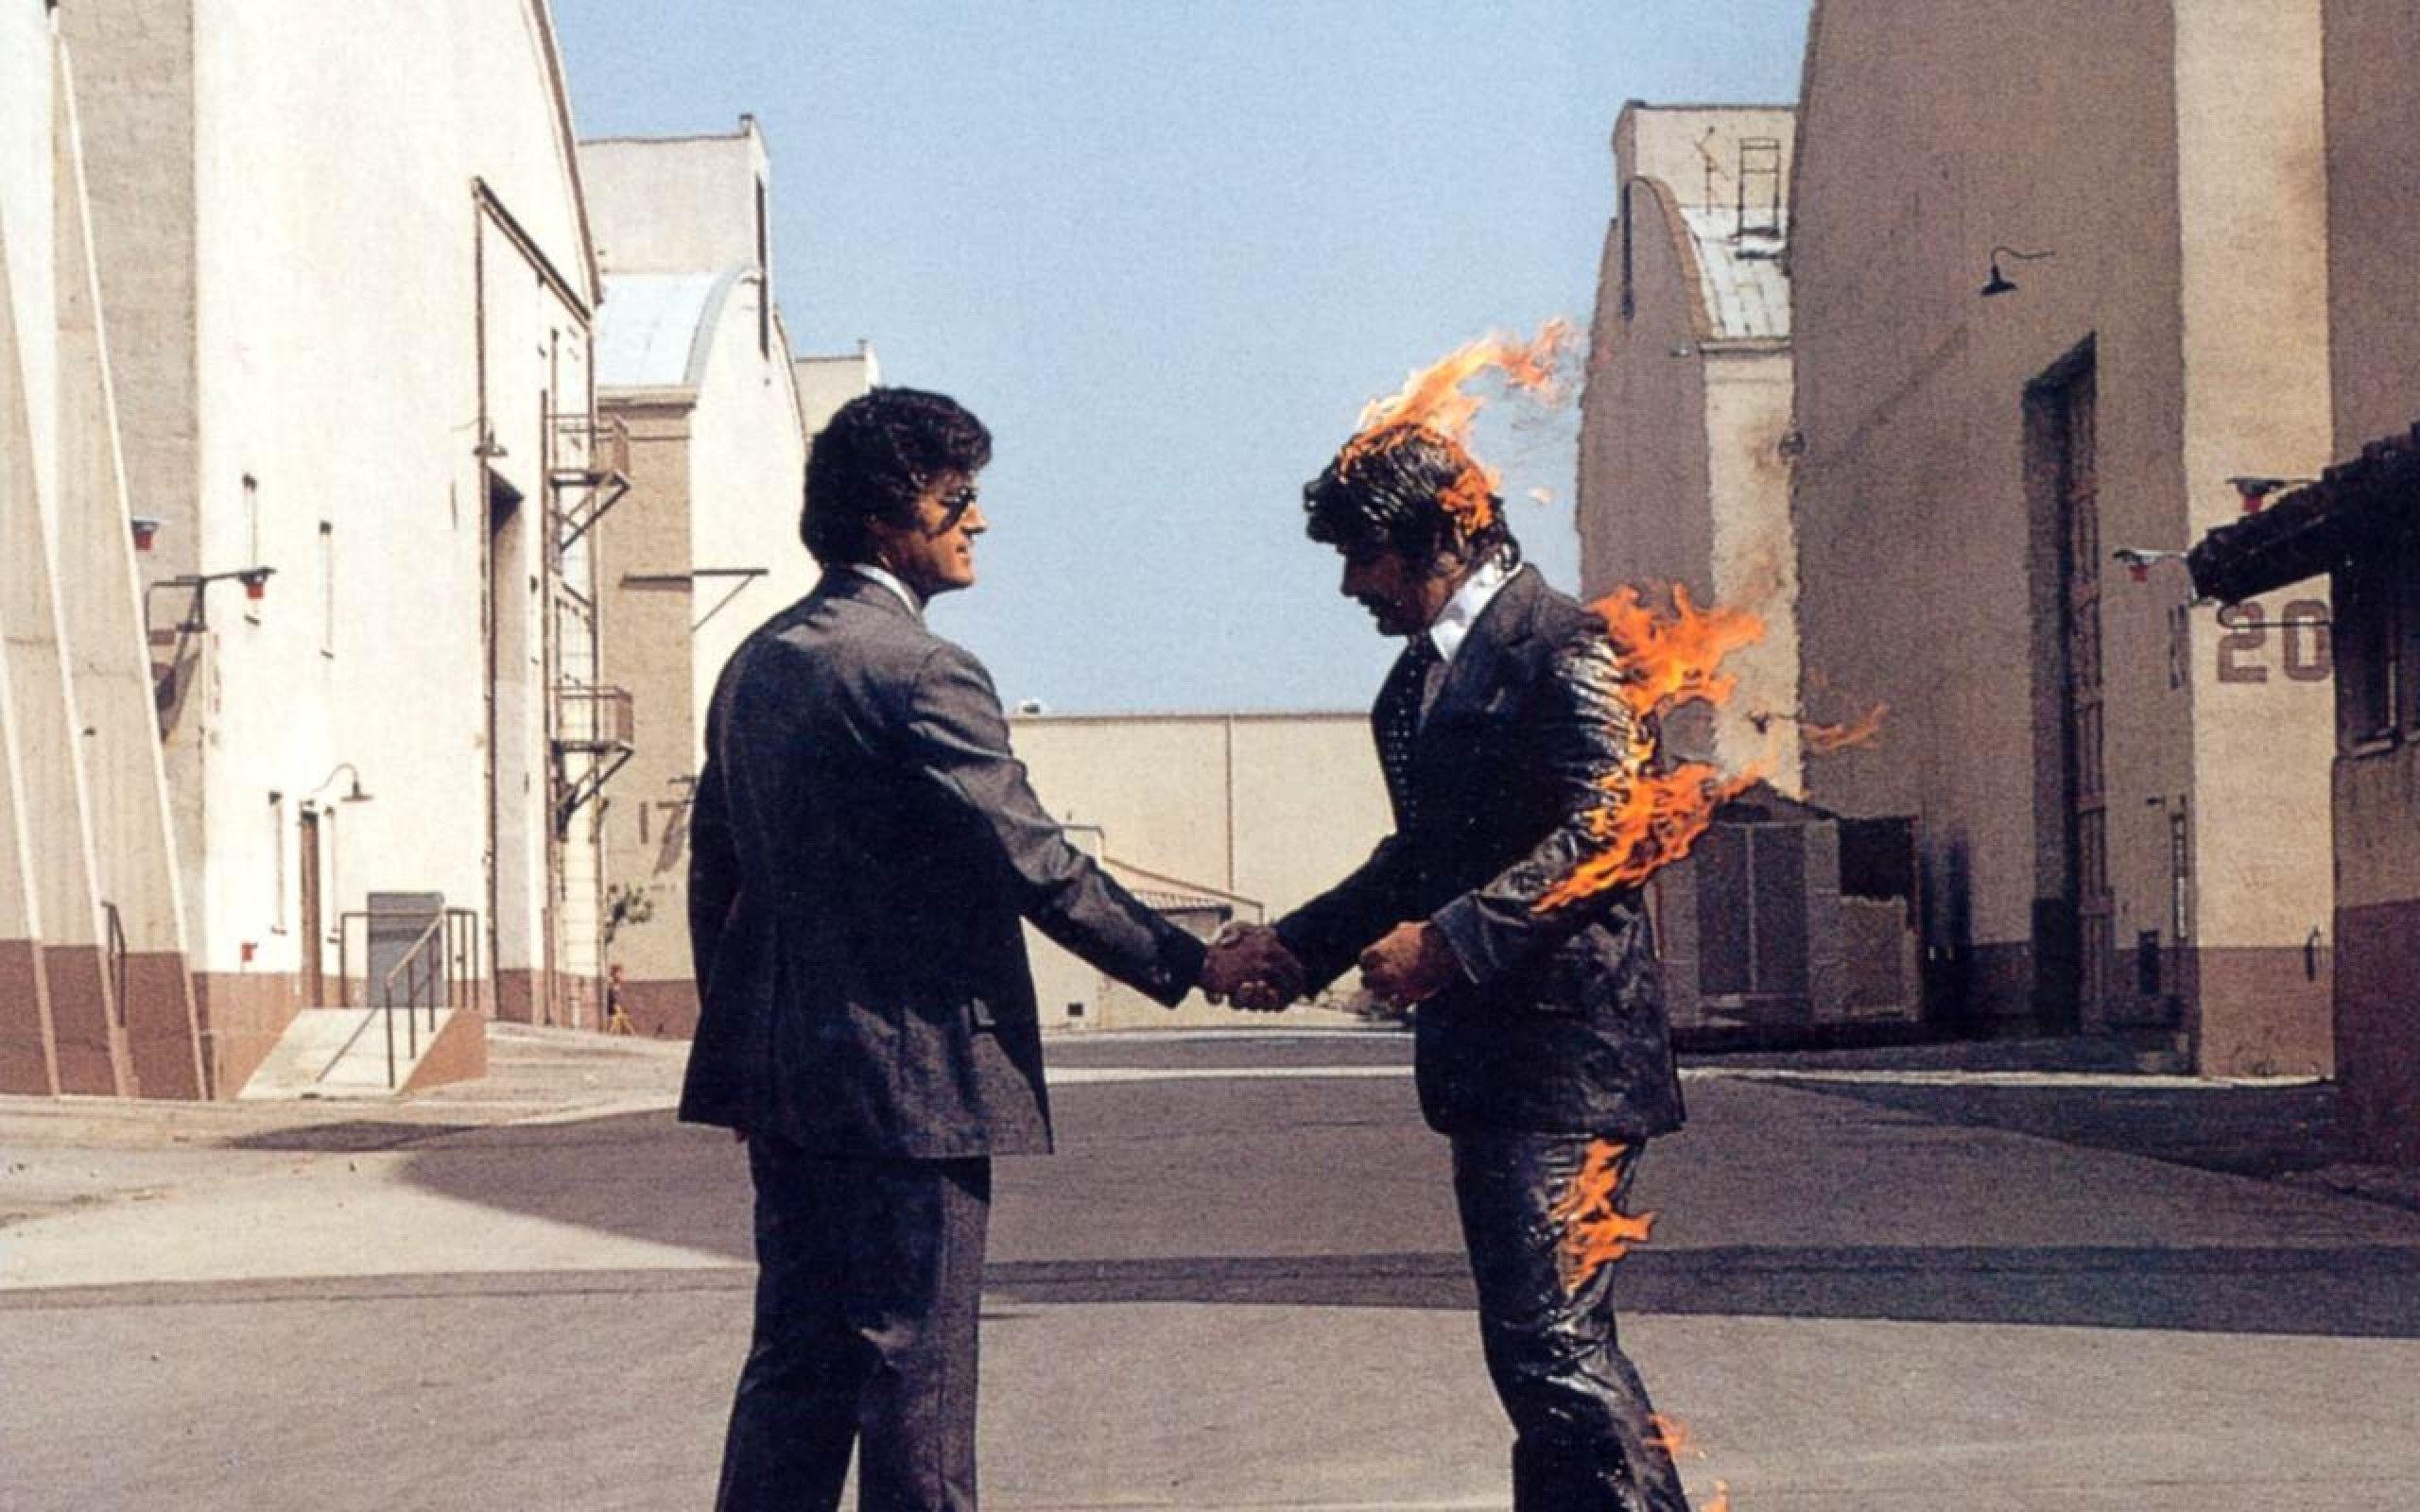 Best Pink Floyd Albums, Wish You Were Here, Animals and The Wall.